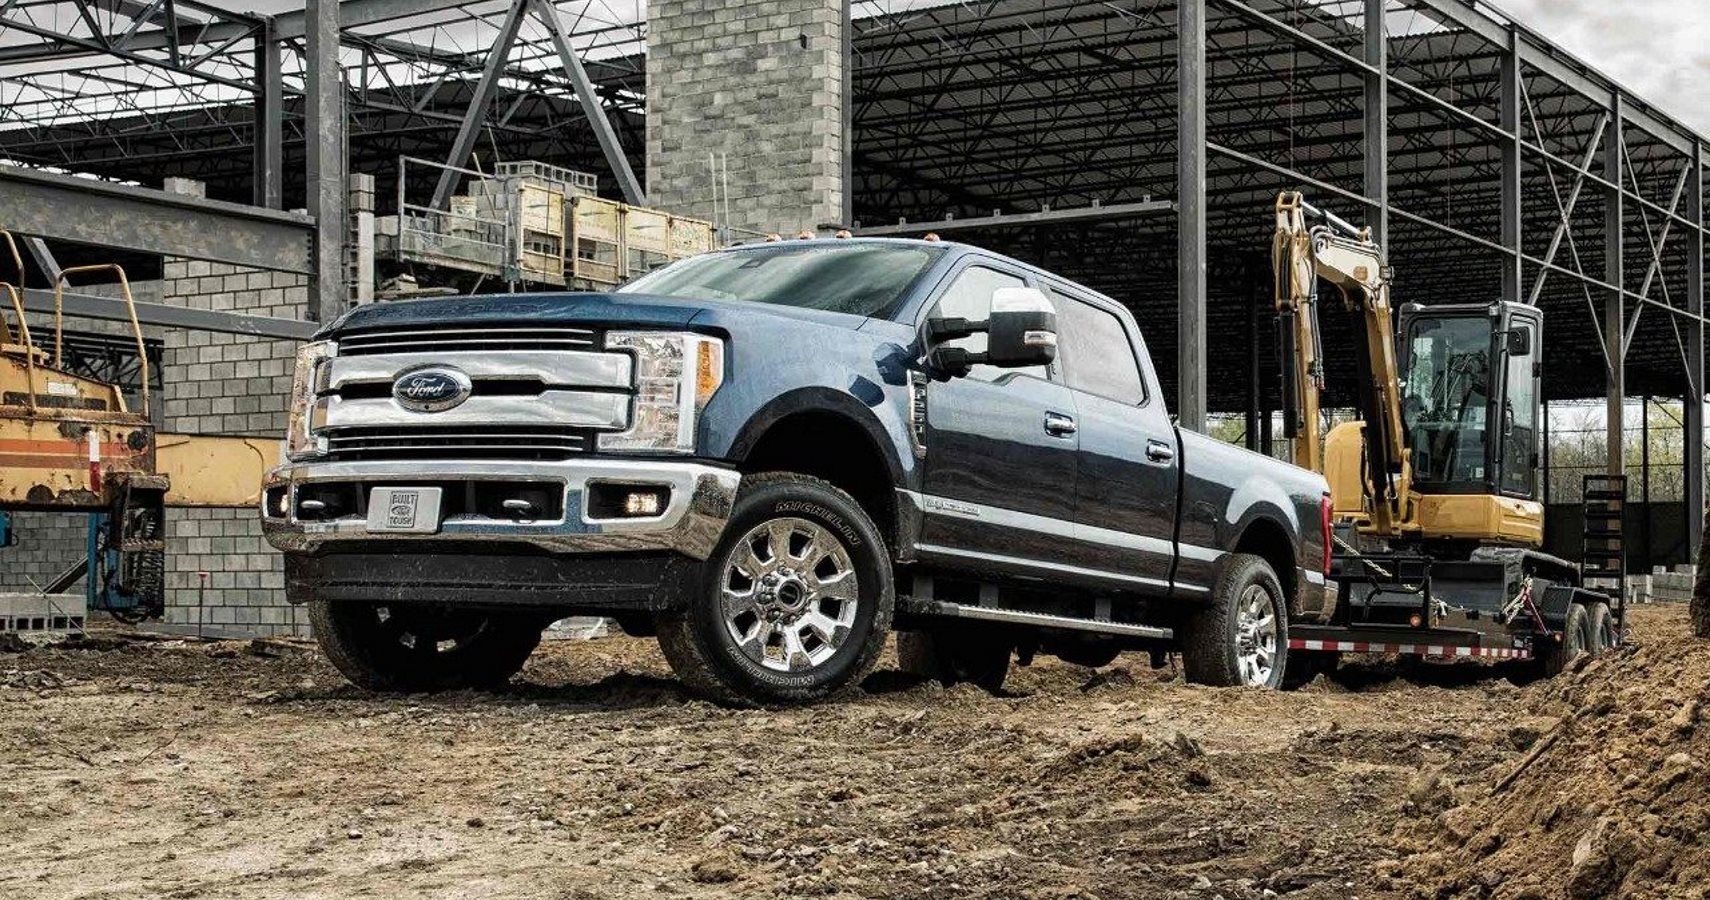 2020 Ford Super Duty Spotted Wearing Camouflage